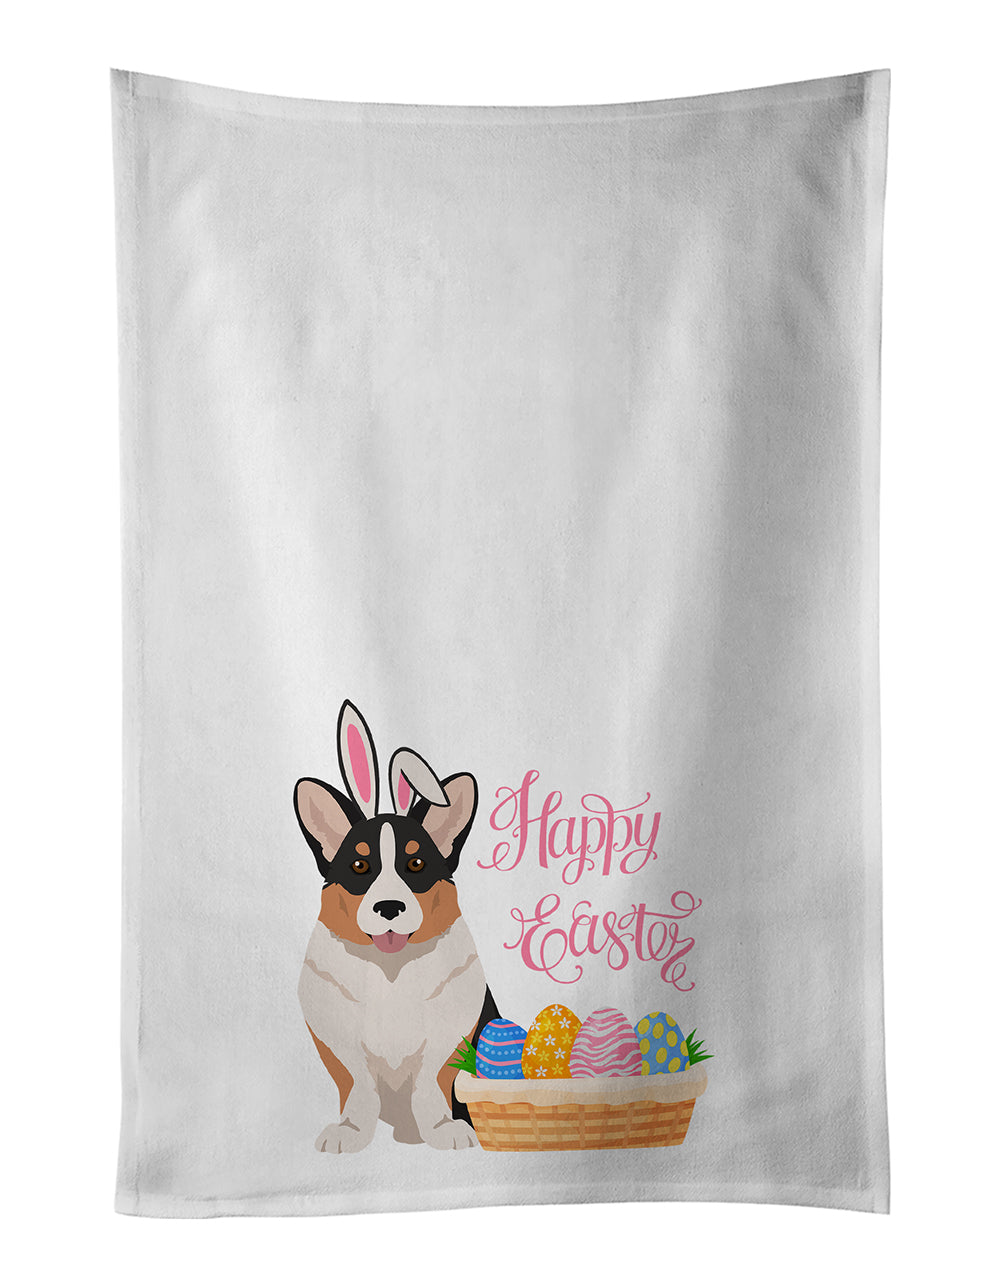 Buy this Tricolor Cardigan Corgi Easter White Kitchen Towel Set of 2 Dish Towels